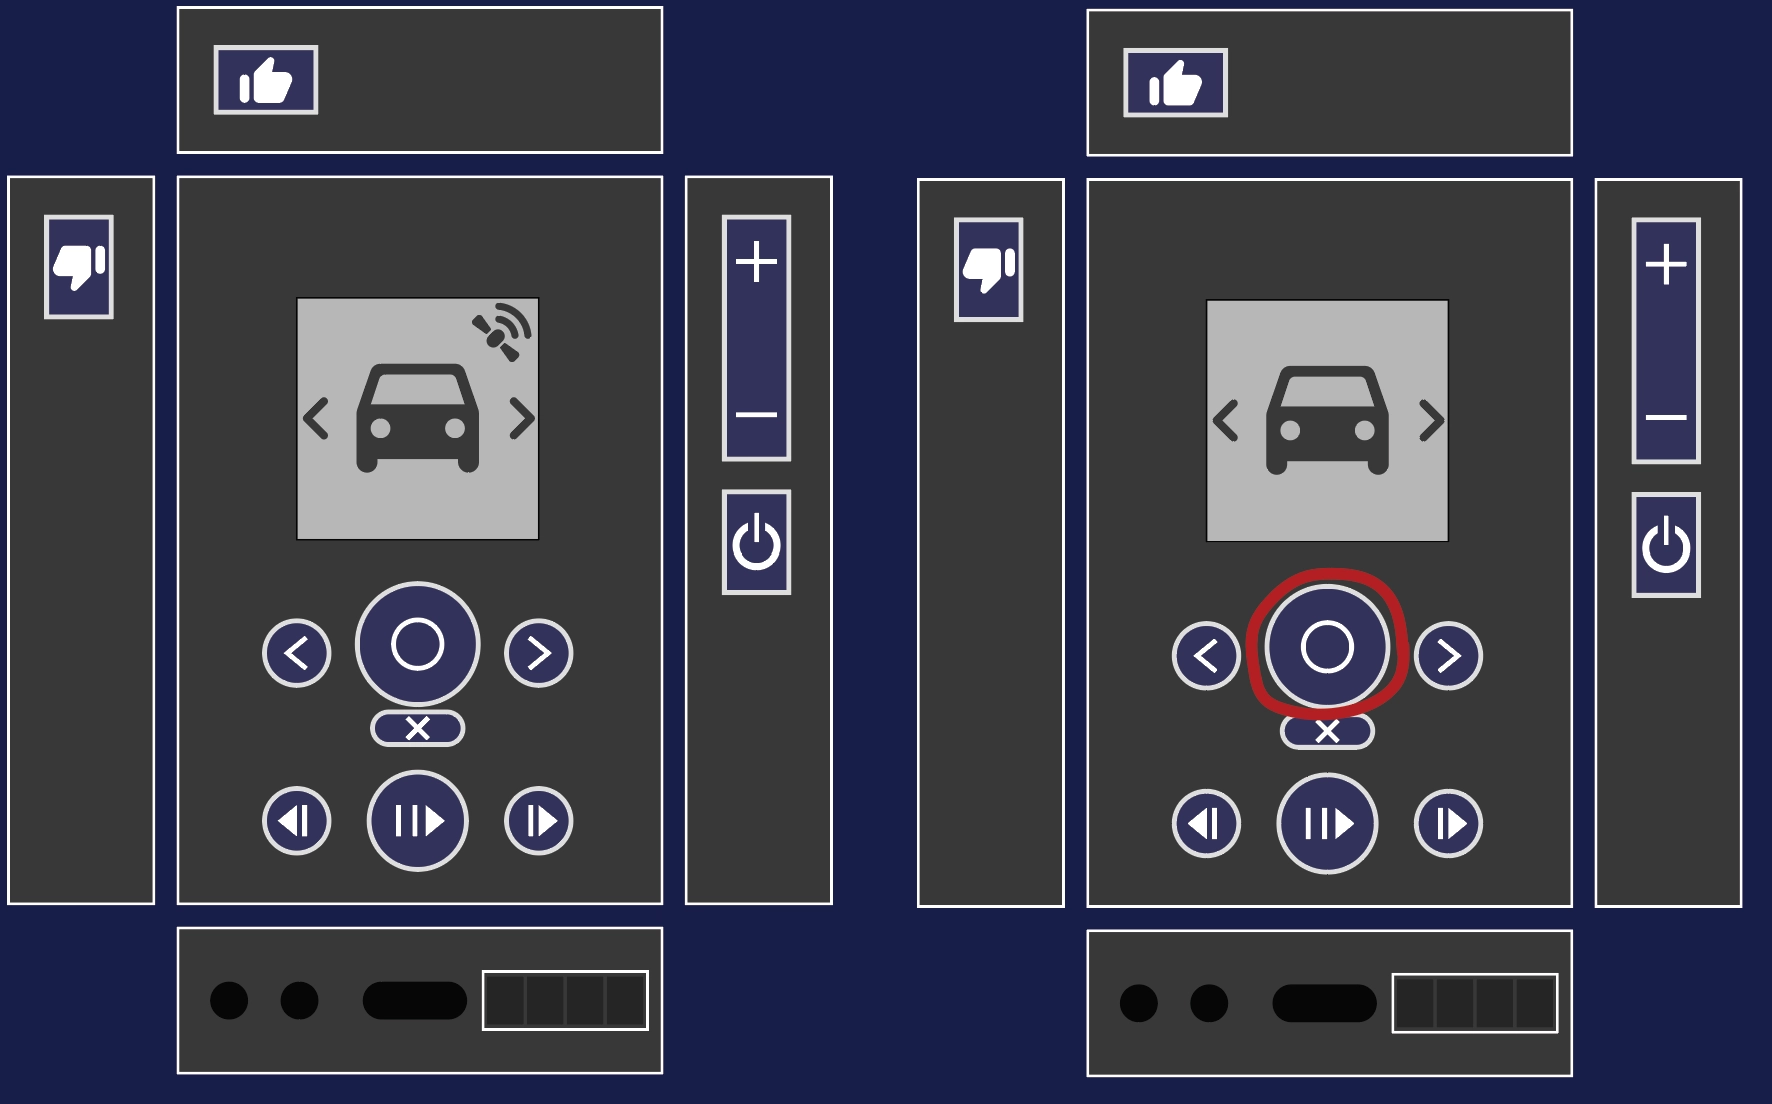 Both screens show a driving icon, one also has a satelite symbol in the corner of the screen.